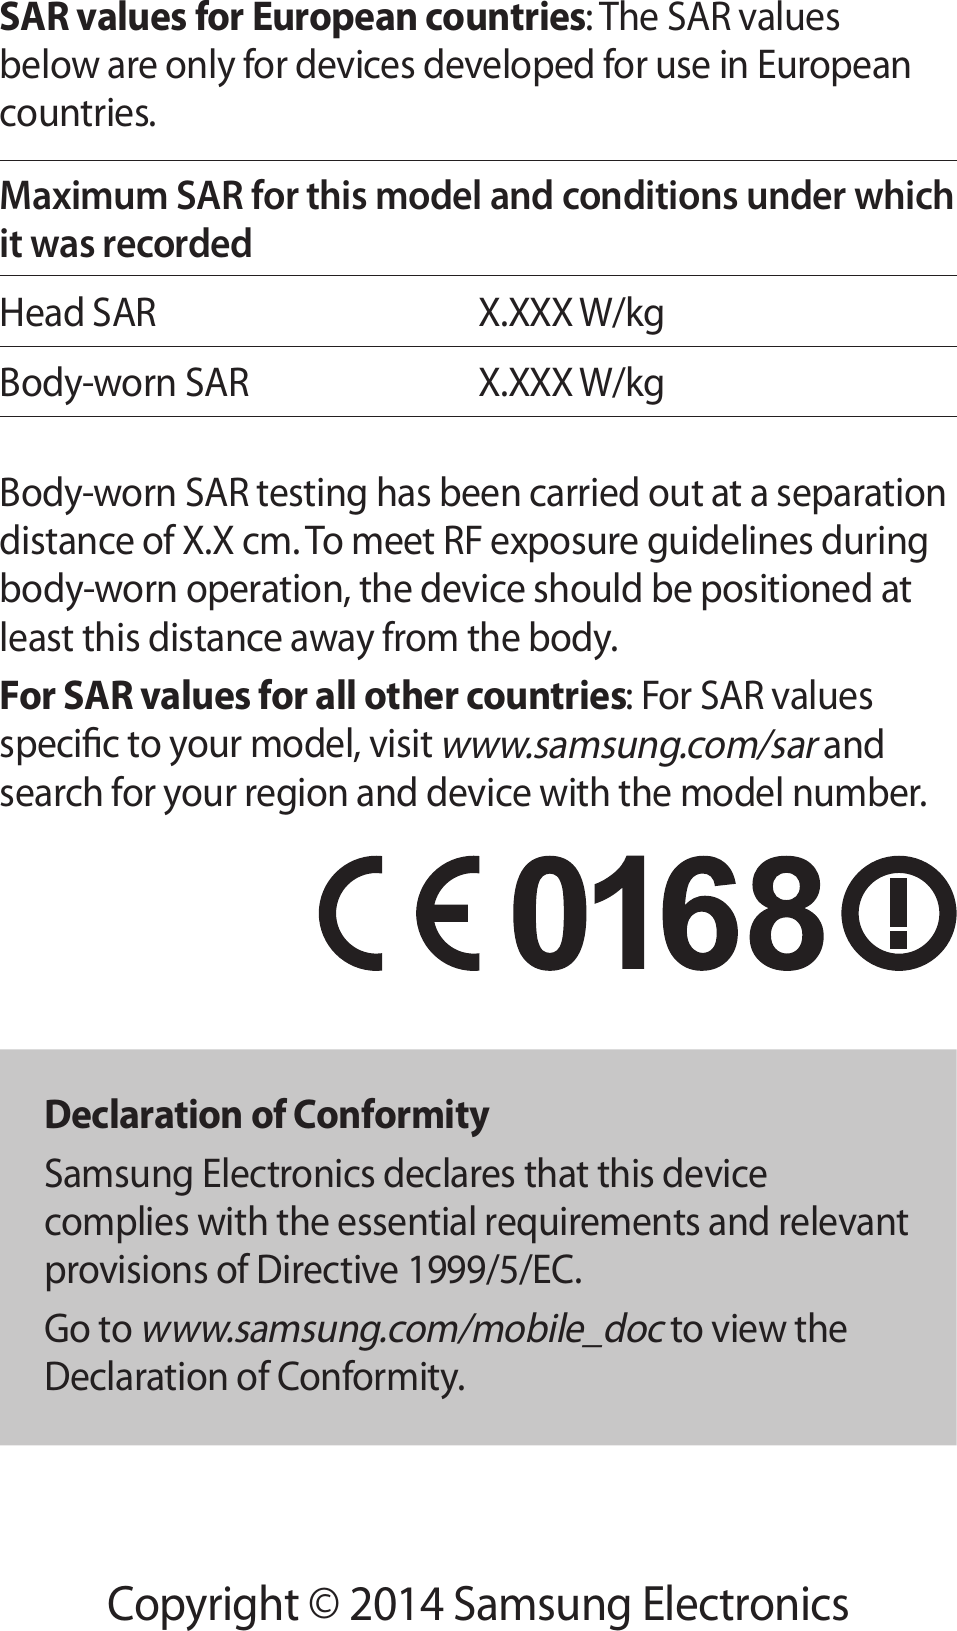 Copyright © 2014 Samsung ElectronicsSAR values for European countries: The SAR values below are only for devices developed for use in European countries.Maximum SAR for this model and conditions under which it was recordedHead SAR X.XXX W/kgBody-worn SARX.XXX W/kgBody-worn SAR testing has been carried out at a separation distance of X.X cm. To meet RF exposure guidelines during body-worn operation, the device should be positioned at least this distance away from the body.For SAR values for all other countries: For SAR values specic to your model, visit www.samsung.com/sar and search for your region and device with the model number.Declaration of ConformitySamsung Electronics declares that this device complies with the essential requirements and relevant provisions of Directive 1999/5/EC.Go to www.samsung.com/mobile_doc to view the Declaration of Conformity.